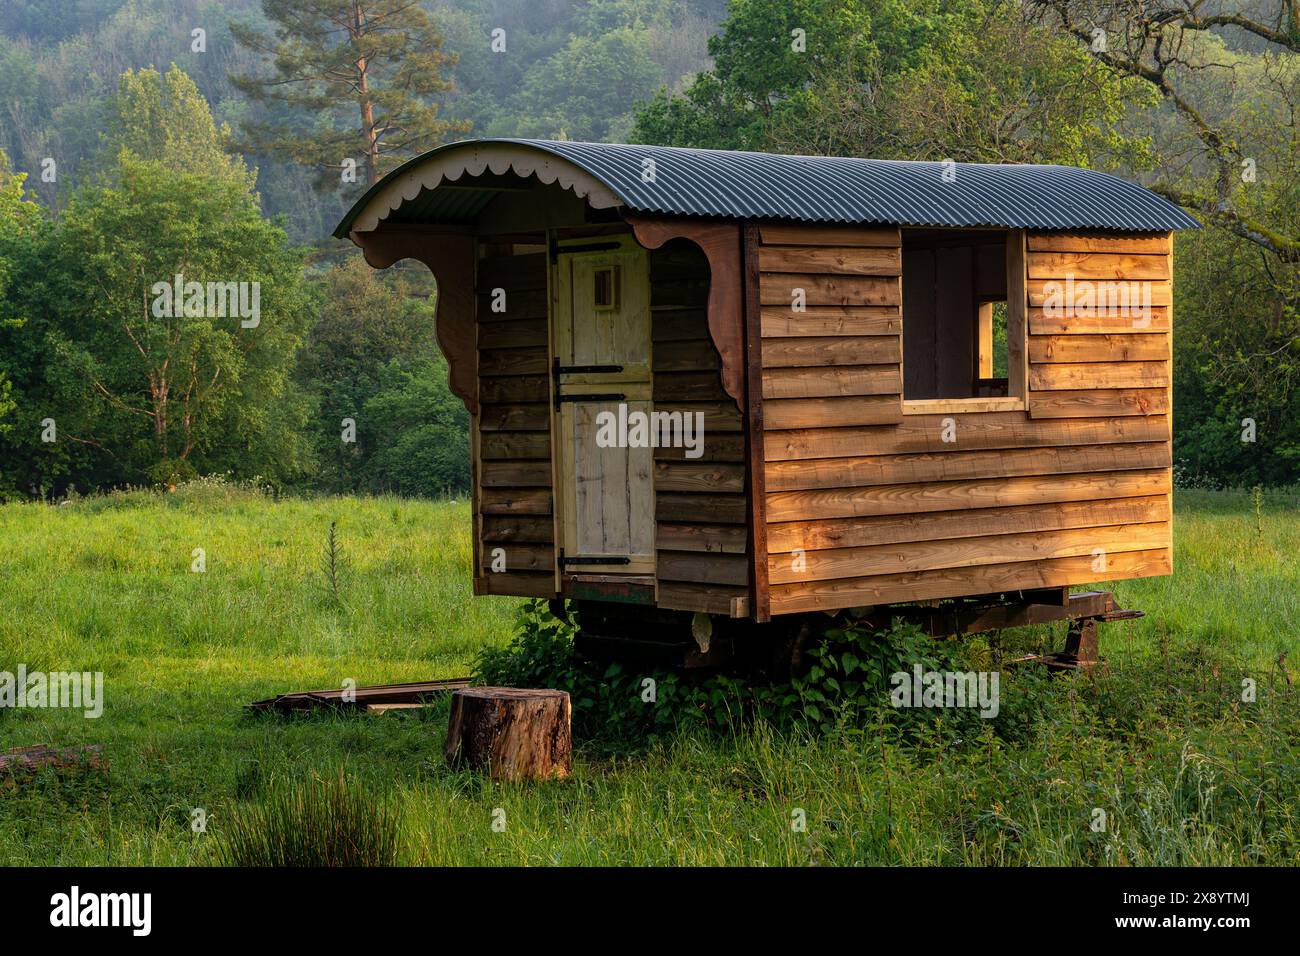 Vintage shepherds hut in a rural setting lit by warm afternoon sunlight Stock Photo